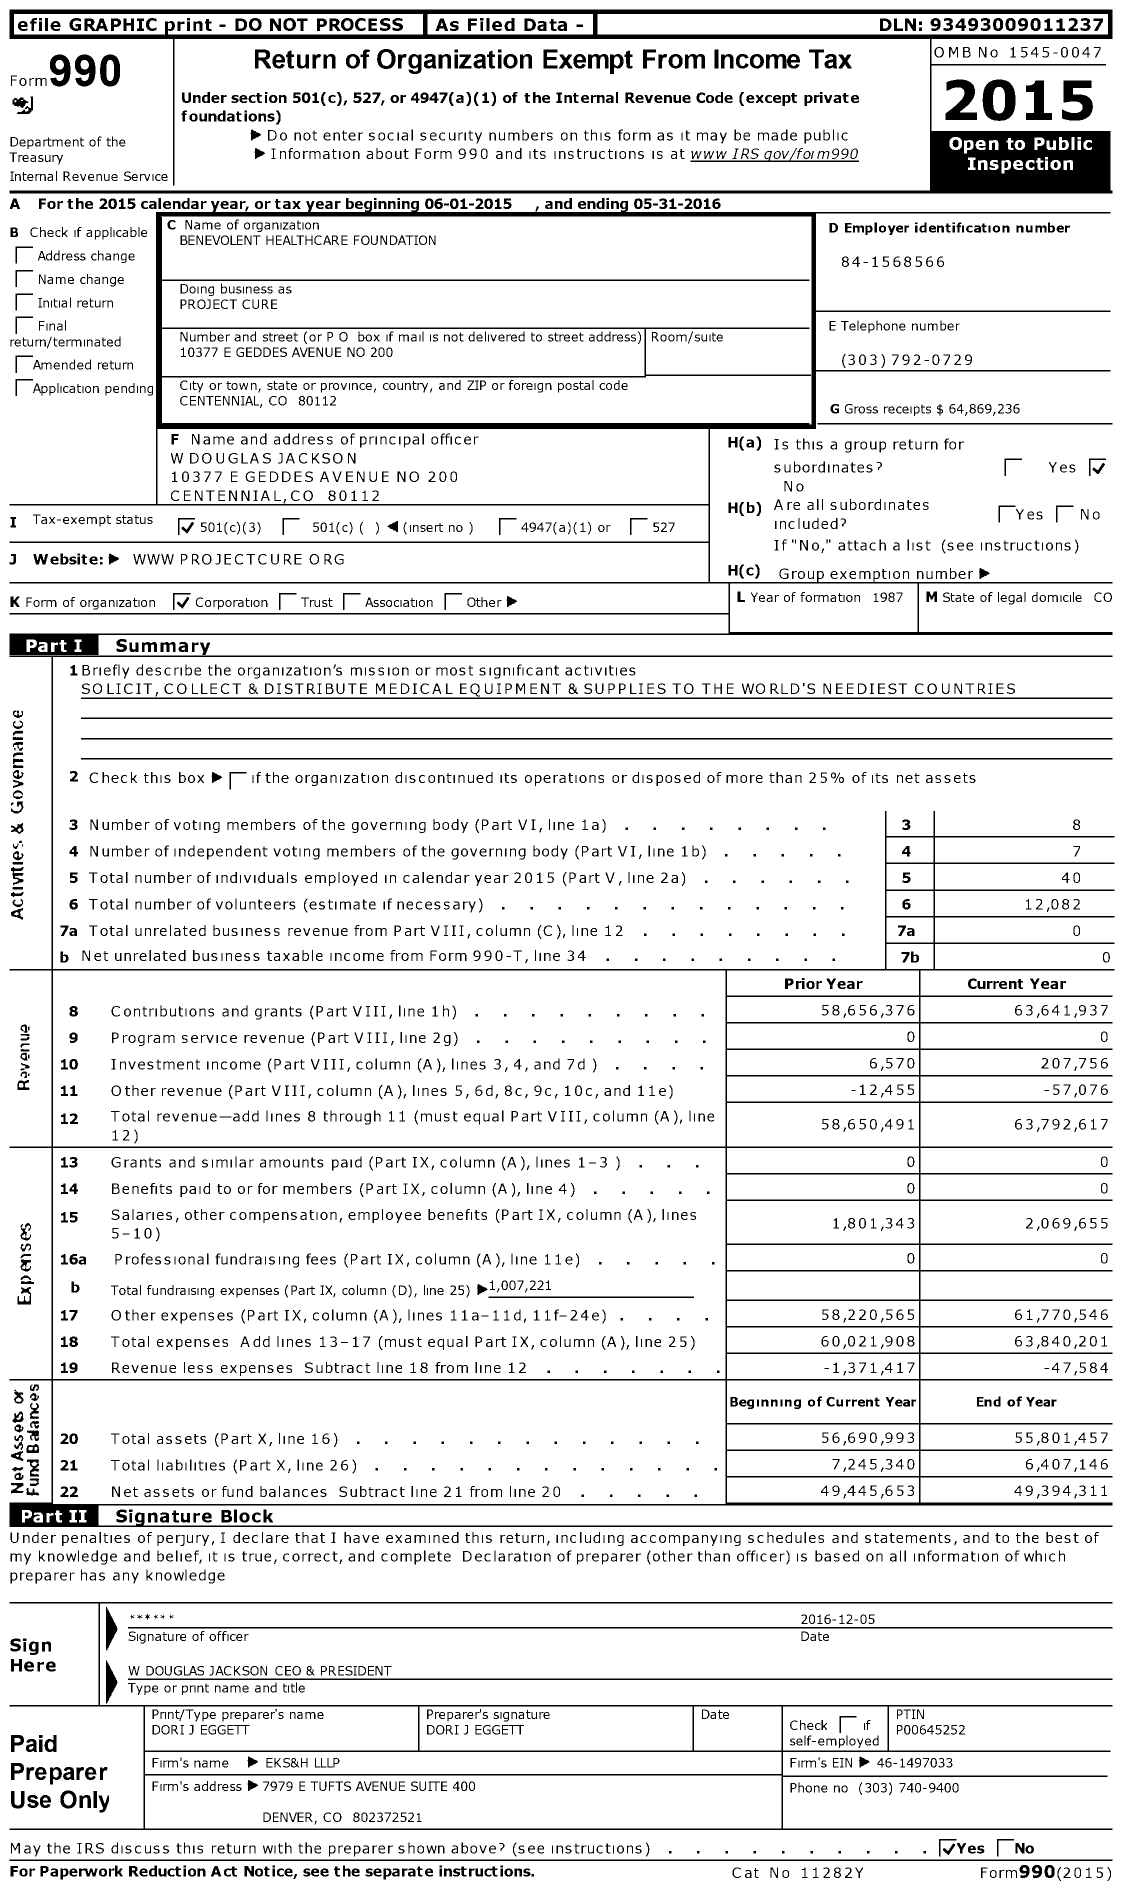 Image of first page of 2015 Form 990 for Project Cure / Benevolent Healthcare Foundation